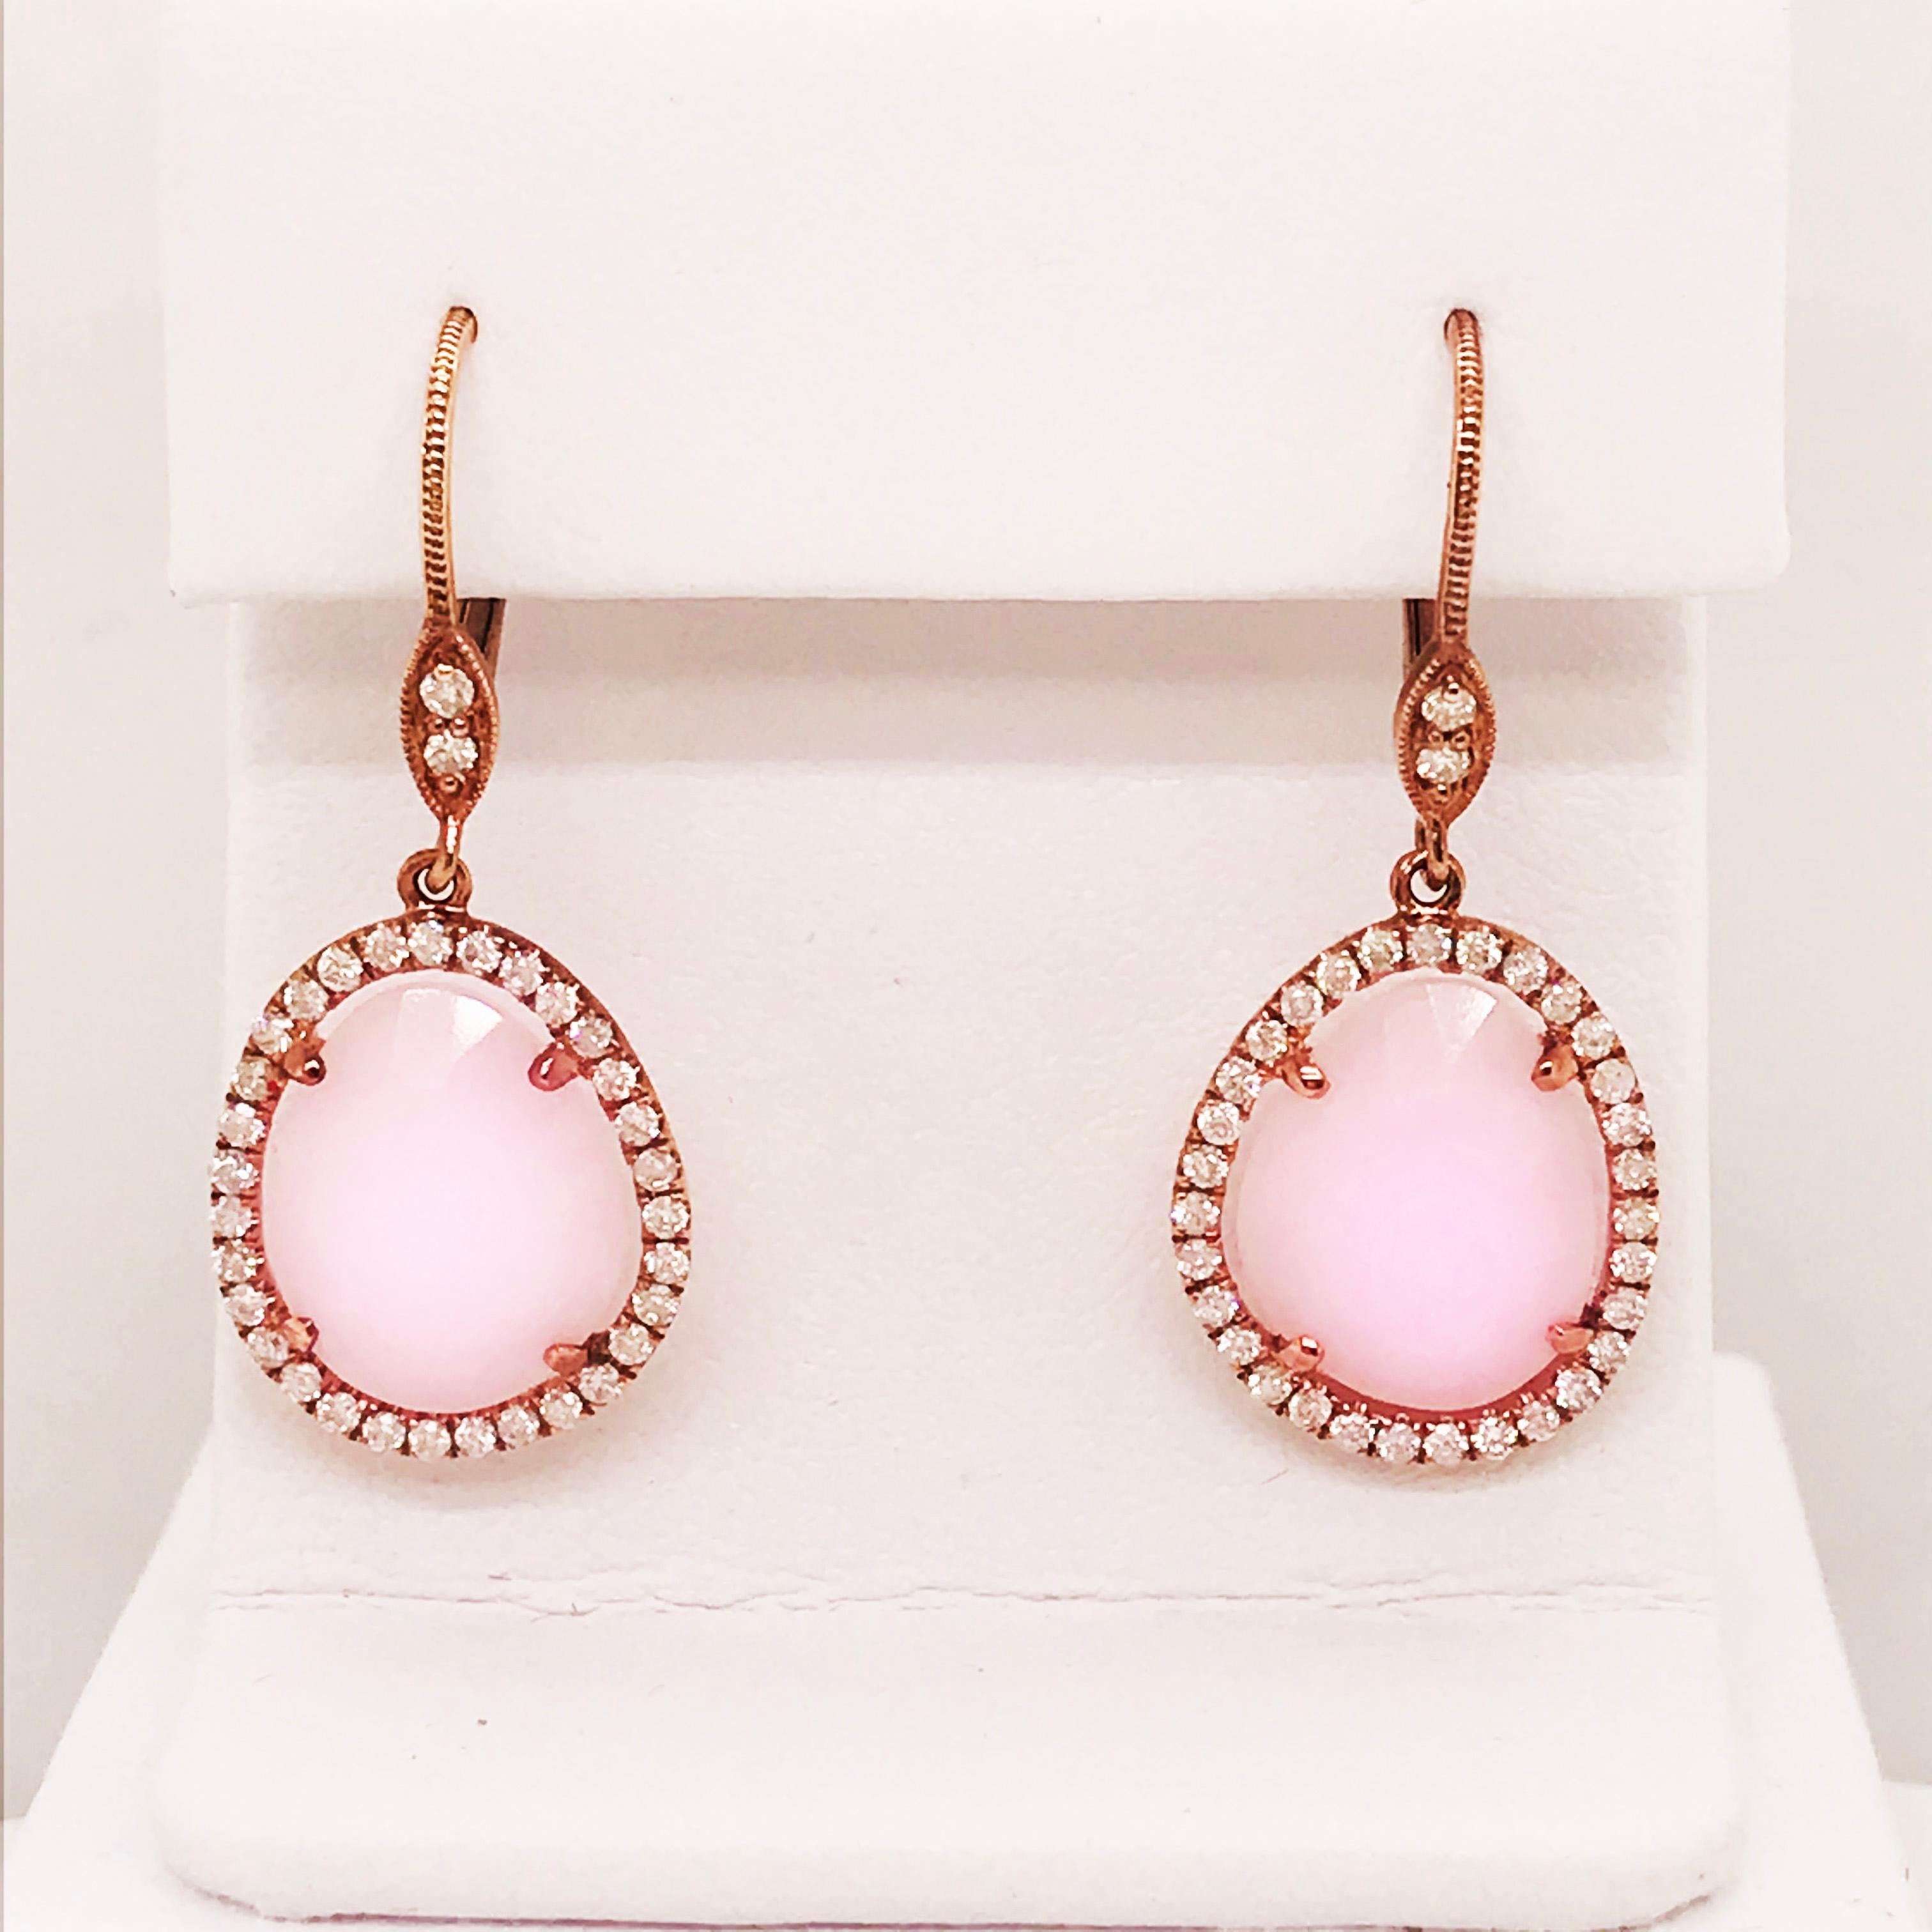 Rose Gold and Pink Opal & Diamond Earring Dangles! These 14 karat rose gold organic genuine pink opal pieces have a beautiful cut that allows light to reflect from every angle of the surface. The pale pink is a subtle touch of rose and set in rose